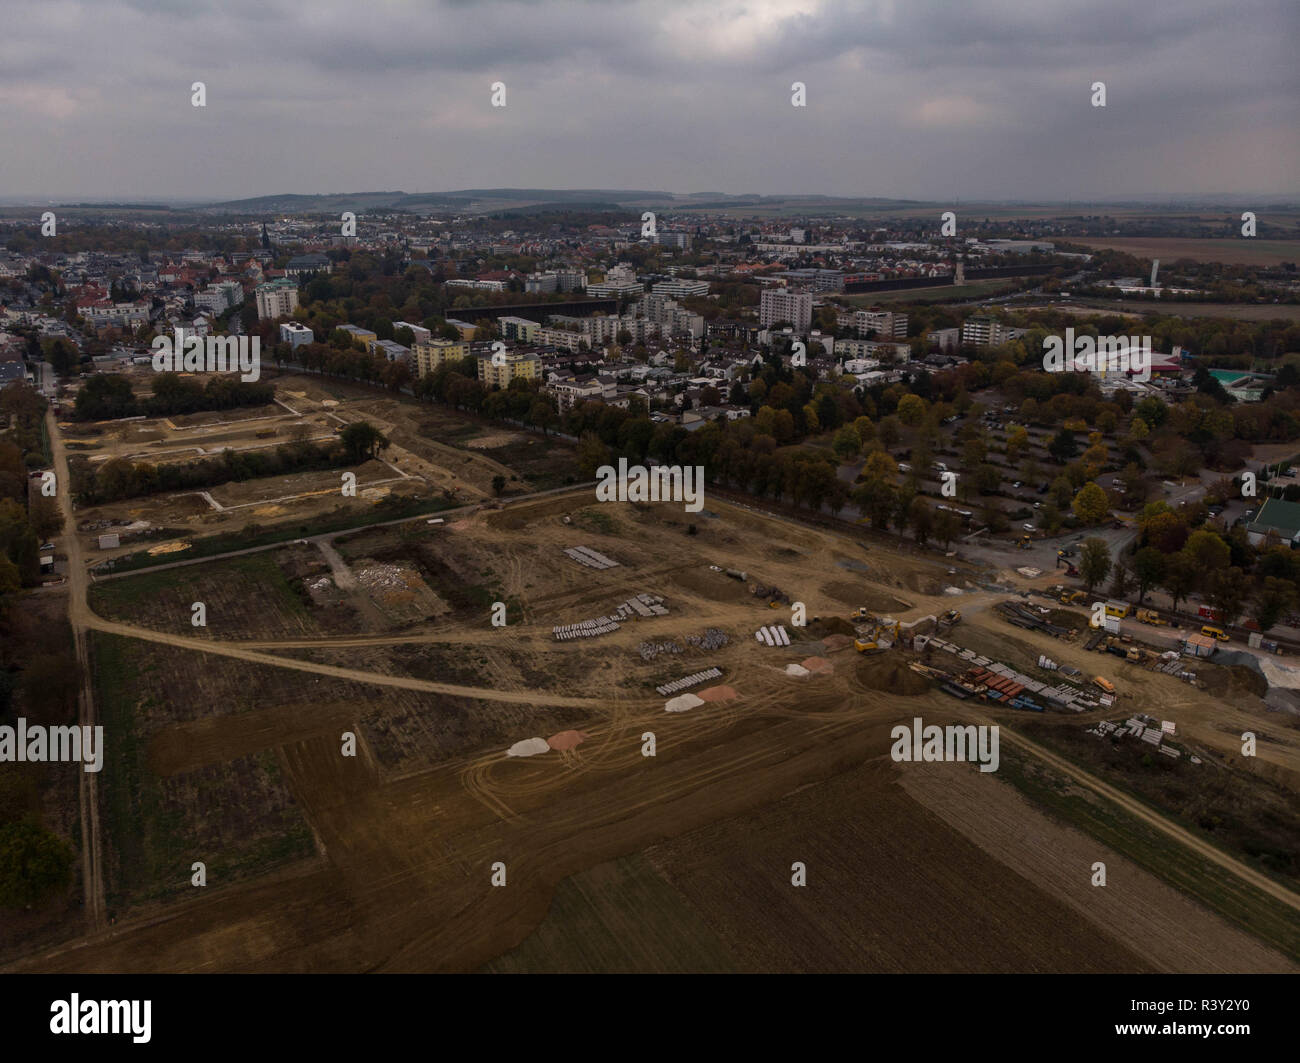 aerial view of a new construction site in the city of Bad Nauheim in Germany Stock Photo